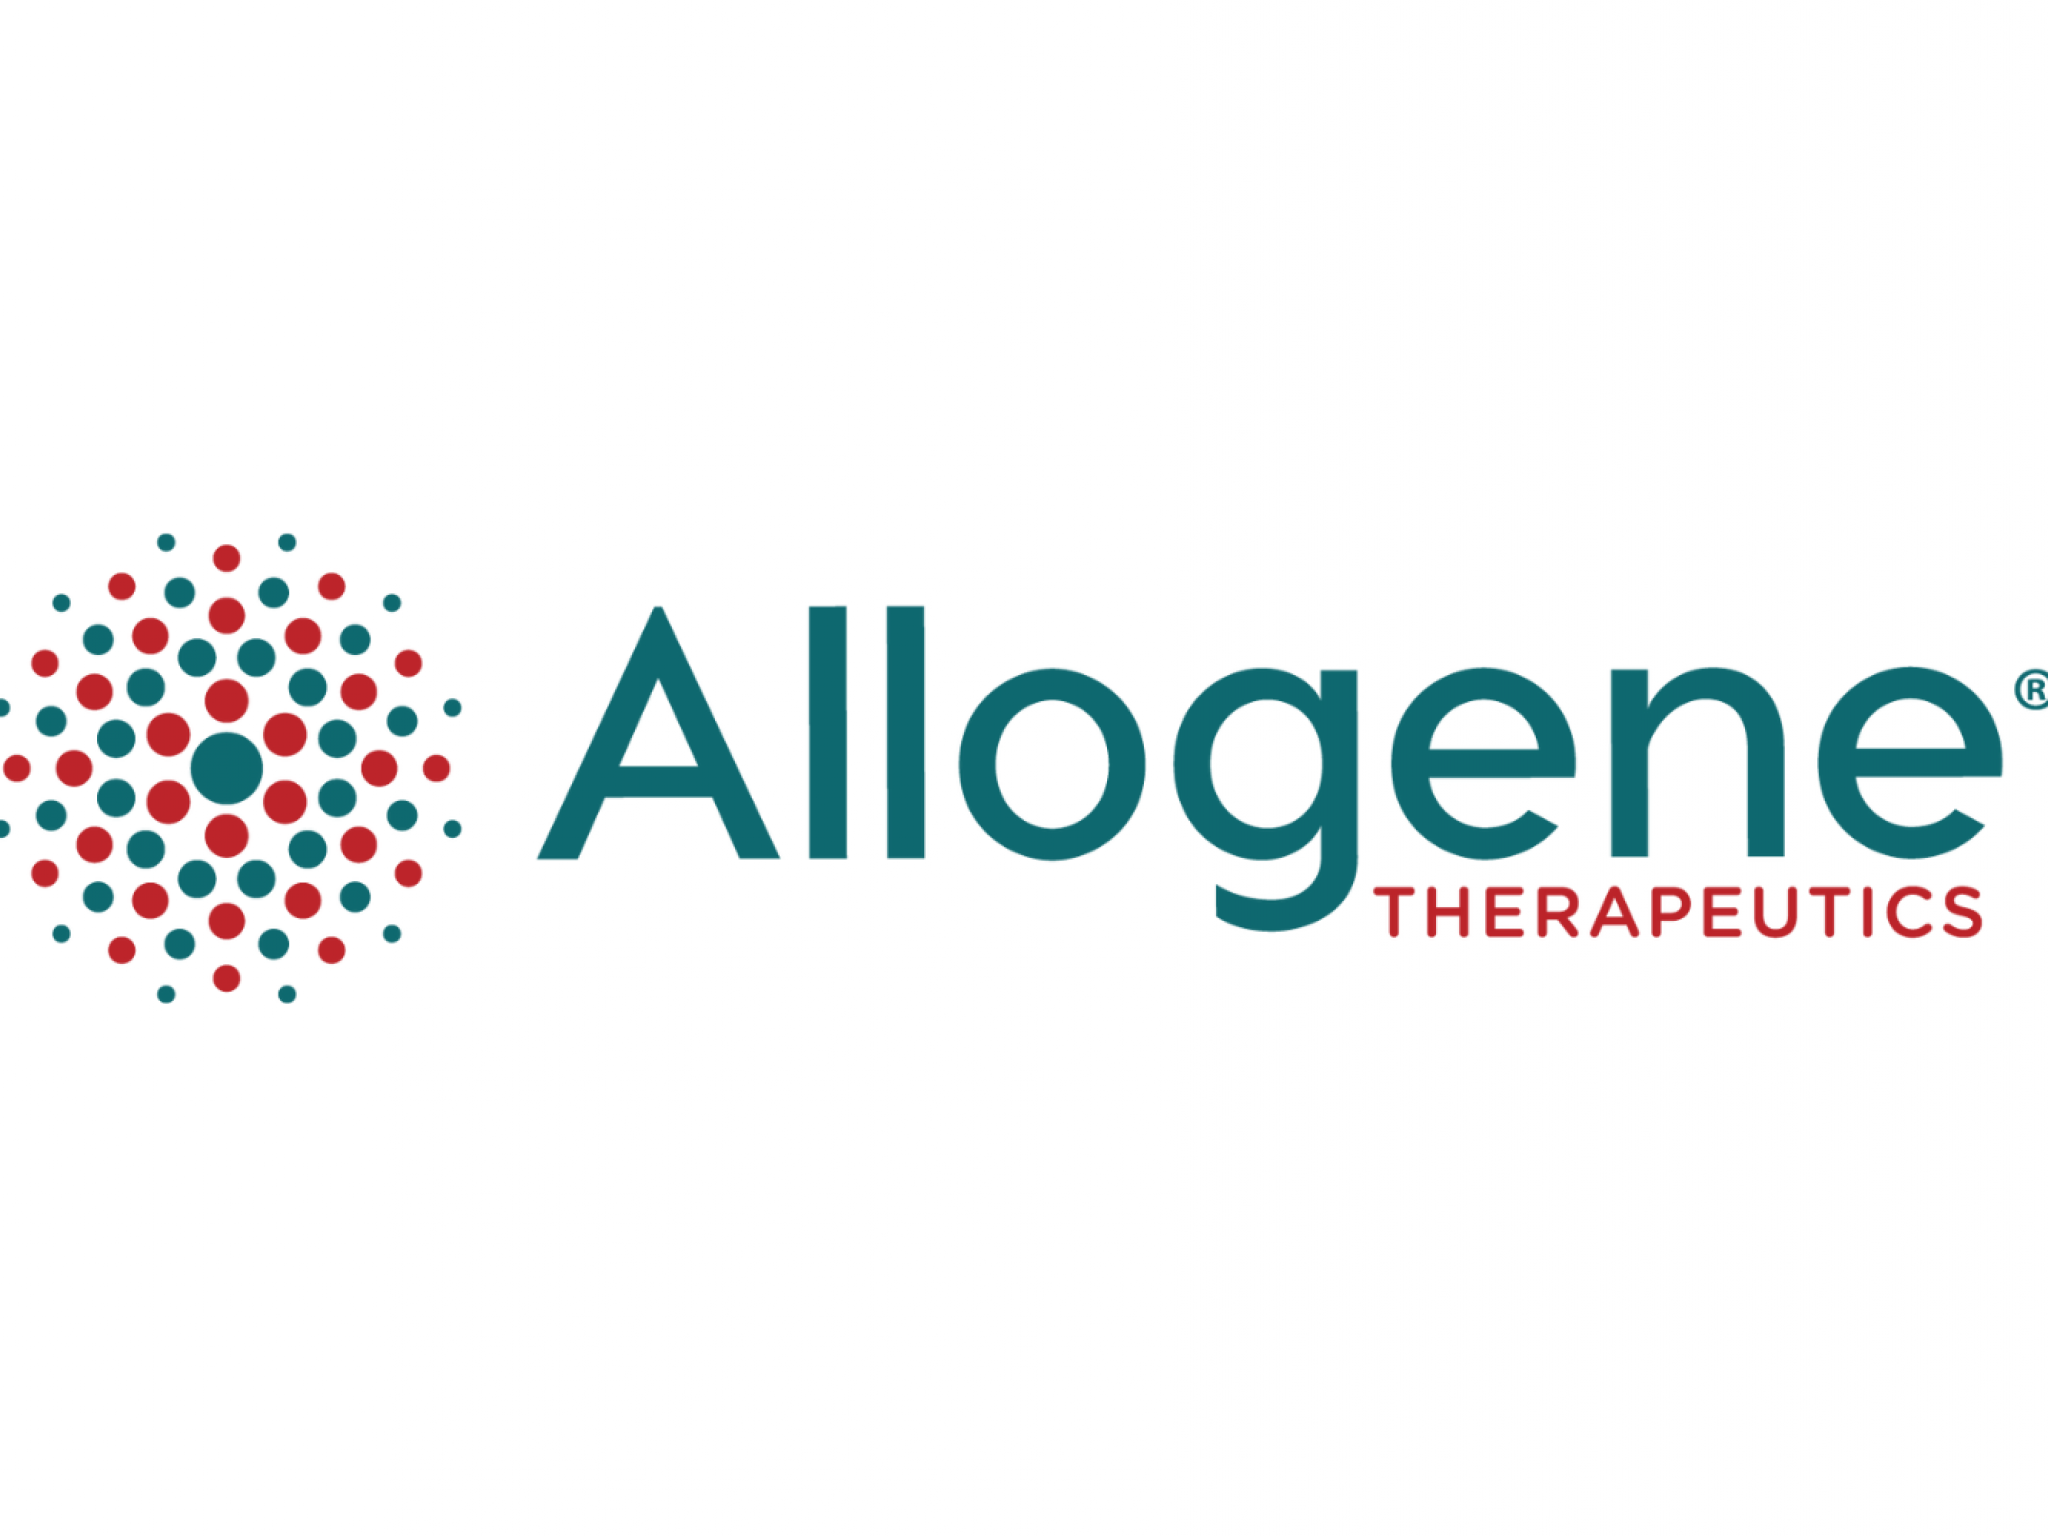  cell-therapy-focused-allogene-therapeutics-resource-prioritization-a-bold-move-says-analyst 